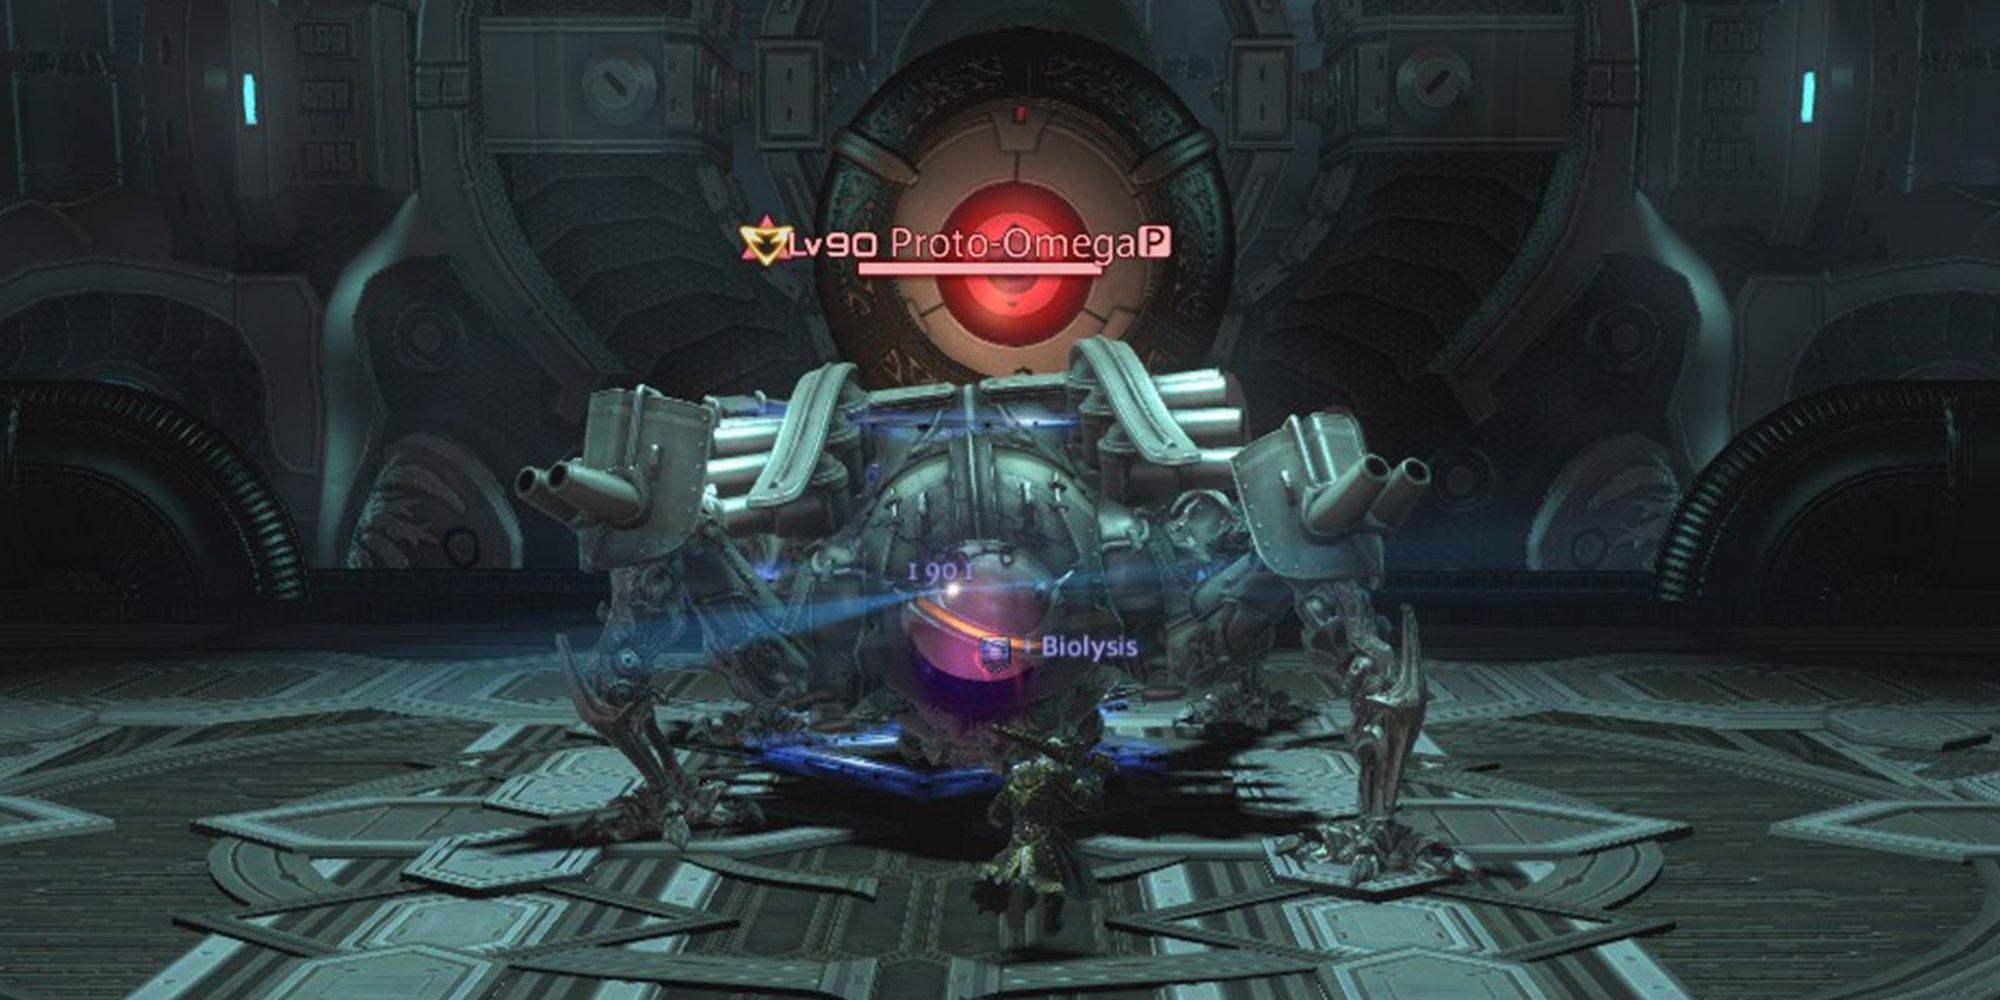 The Stigma Dreamscape dungeon from Final Fantasy 14: Endwalker. An adventurer fights a quadraped machine, Proto-Omega.